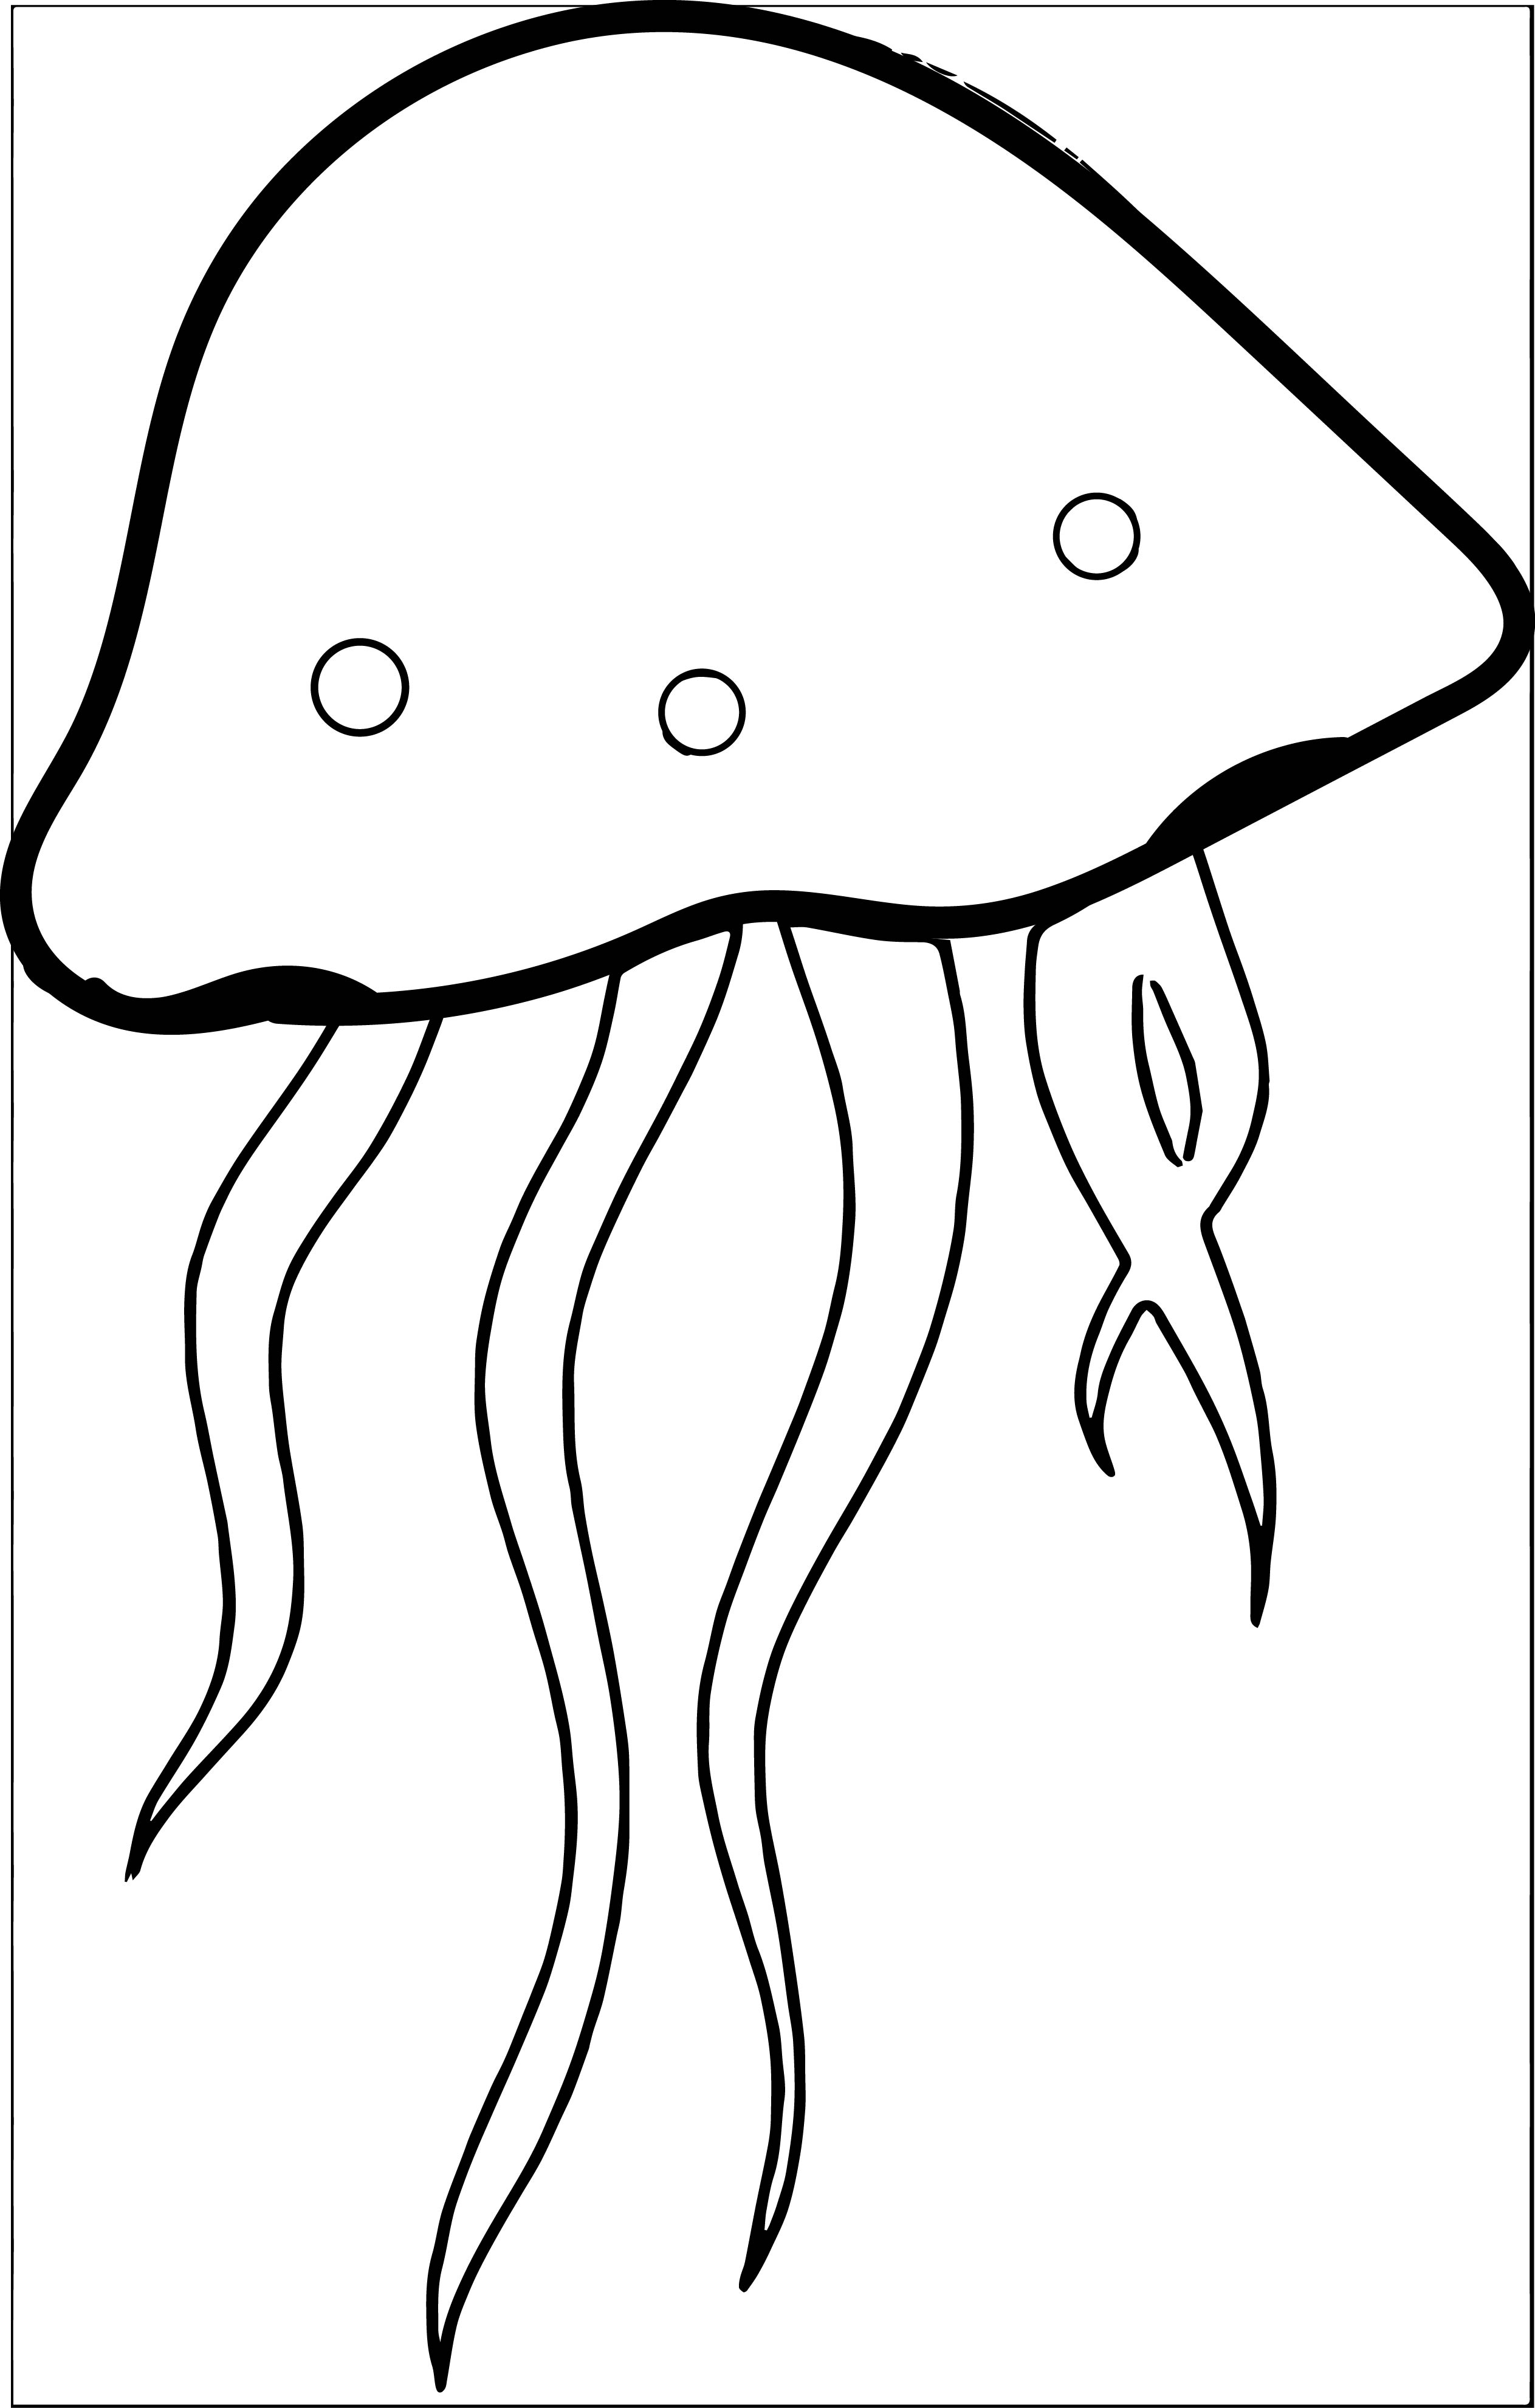 jelly-fish-clip-art-clipart-best